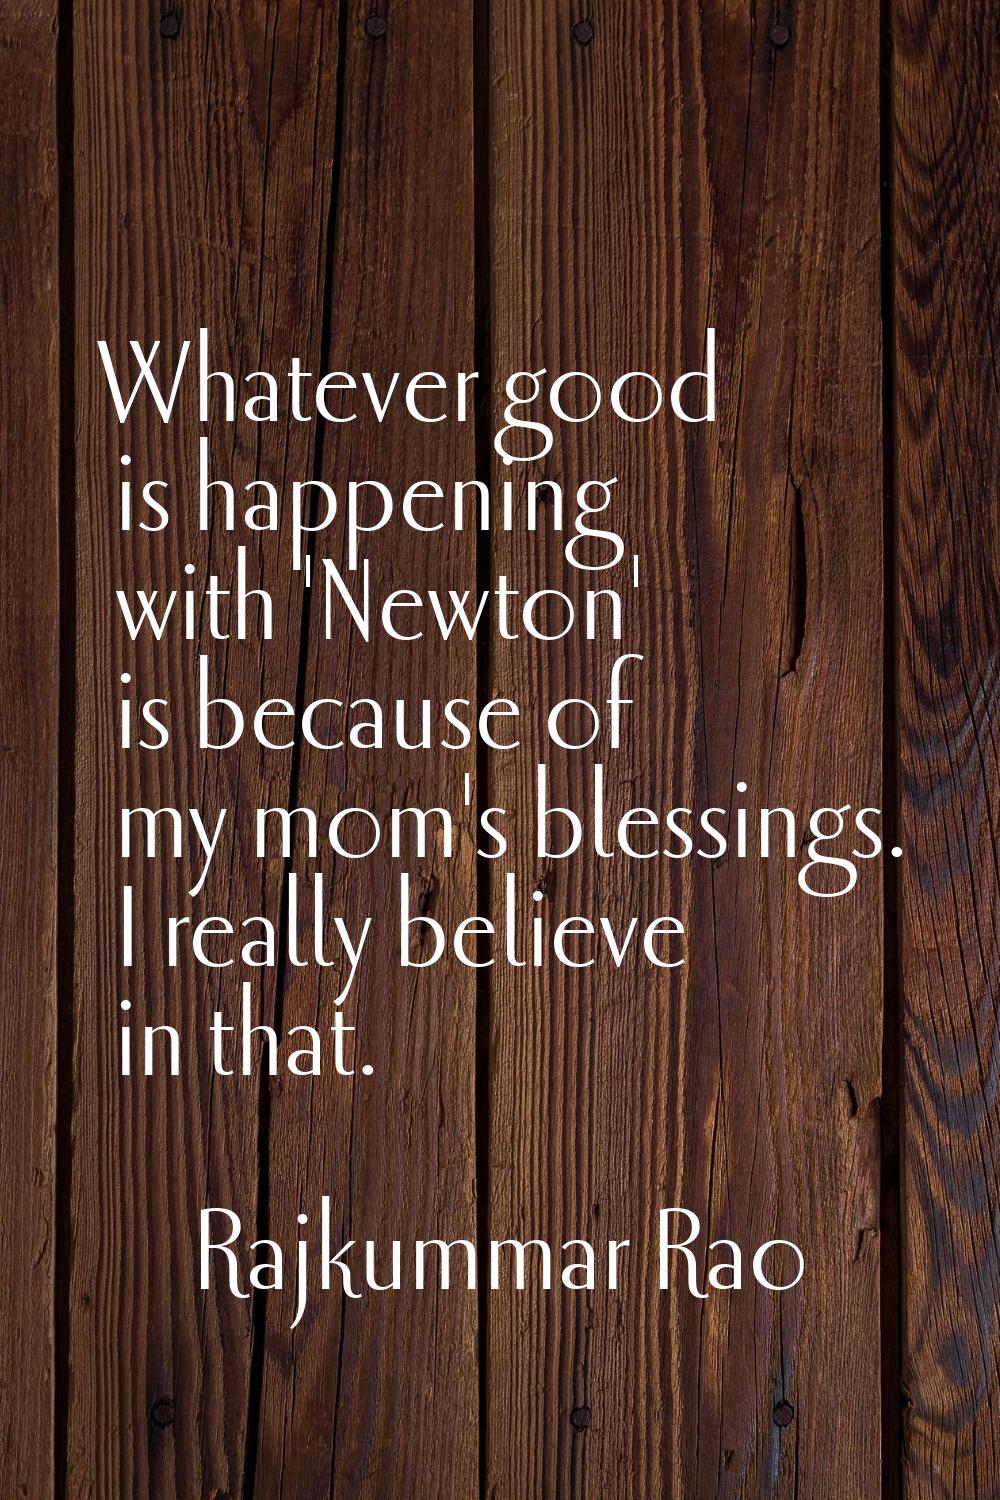 Whatever good is happening with 'Newton' is because of my mom's blessings. I really believe in that